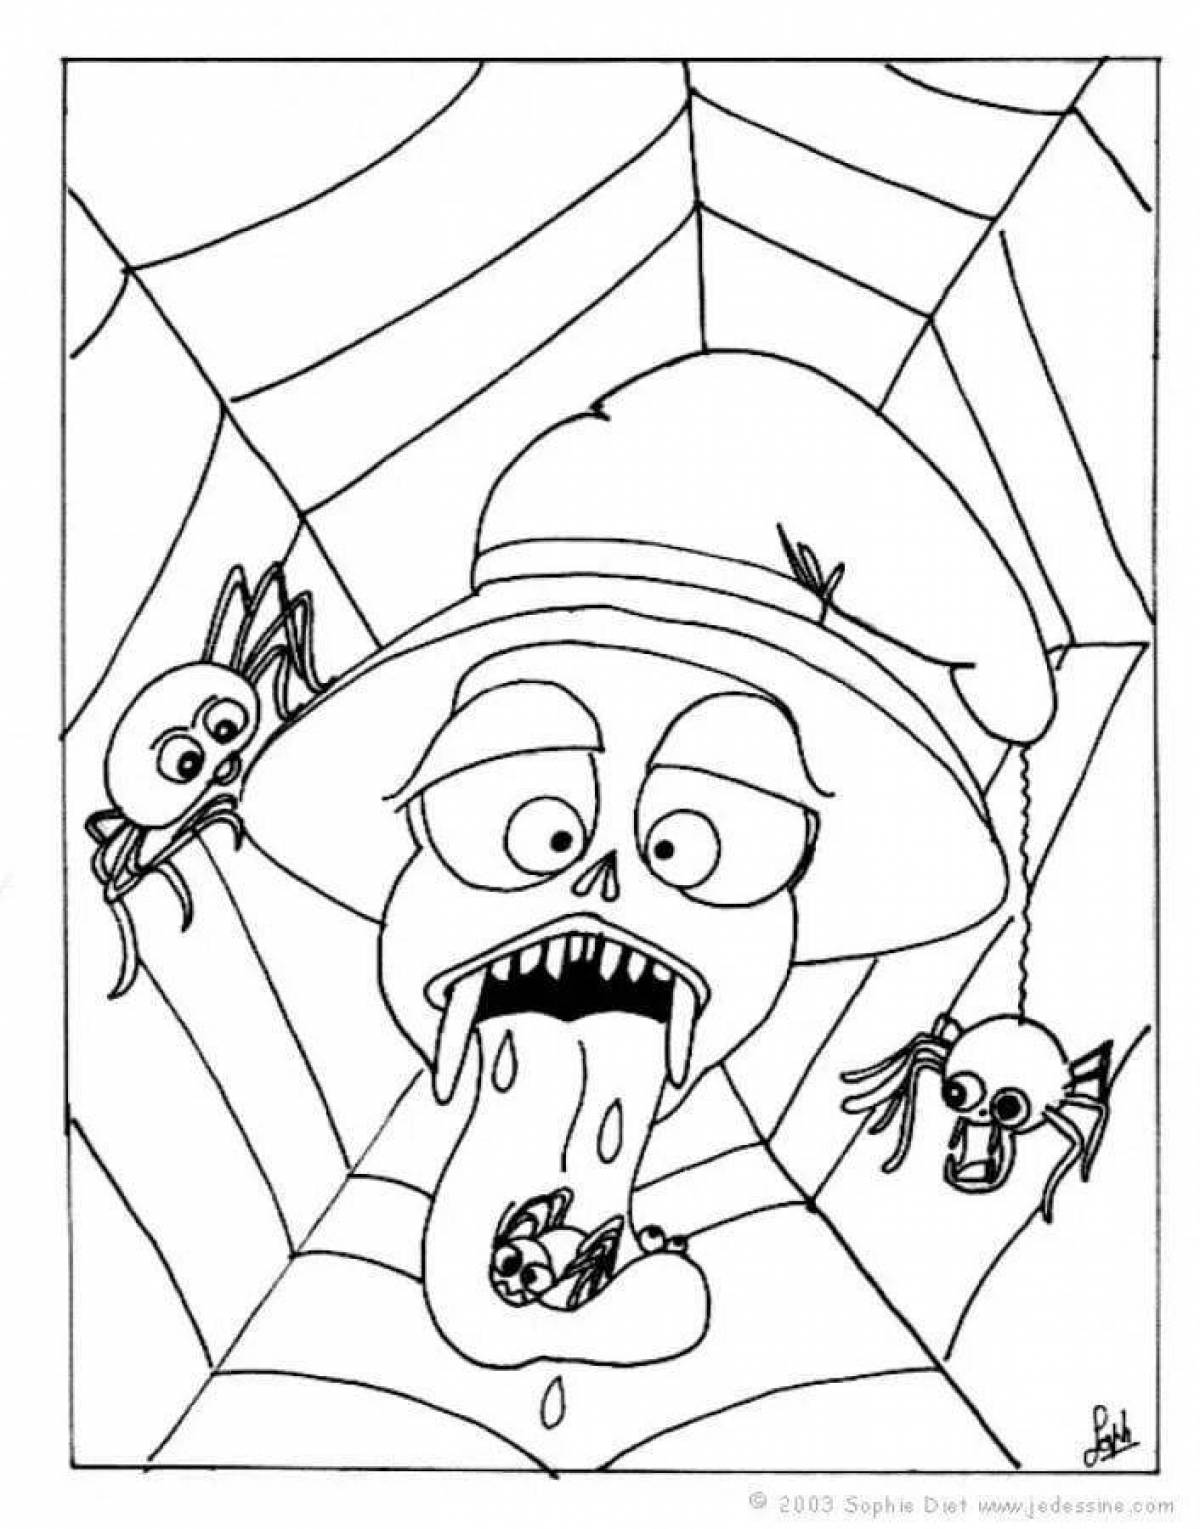 Creepy horror coloring pages for kids